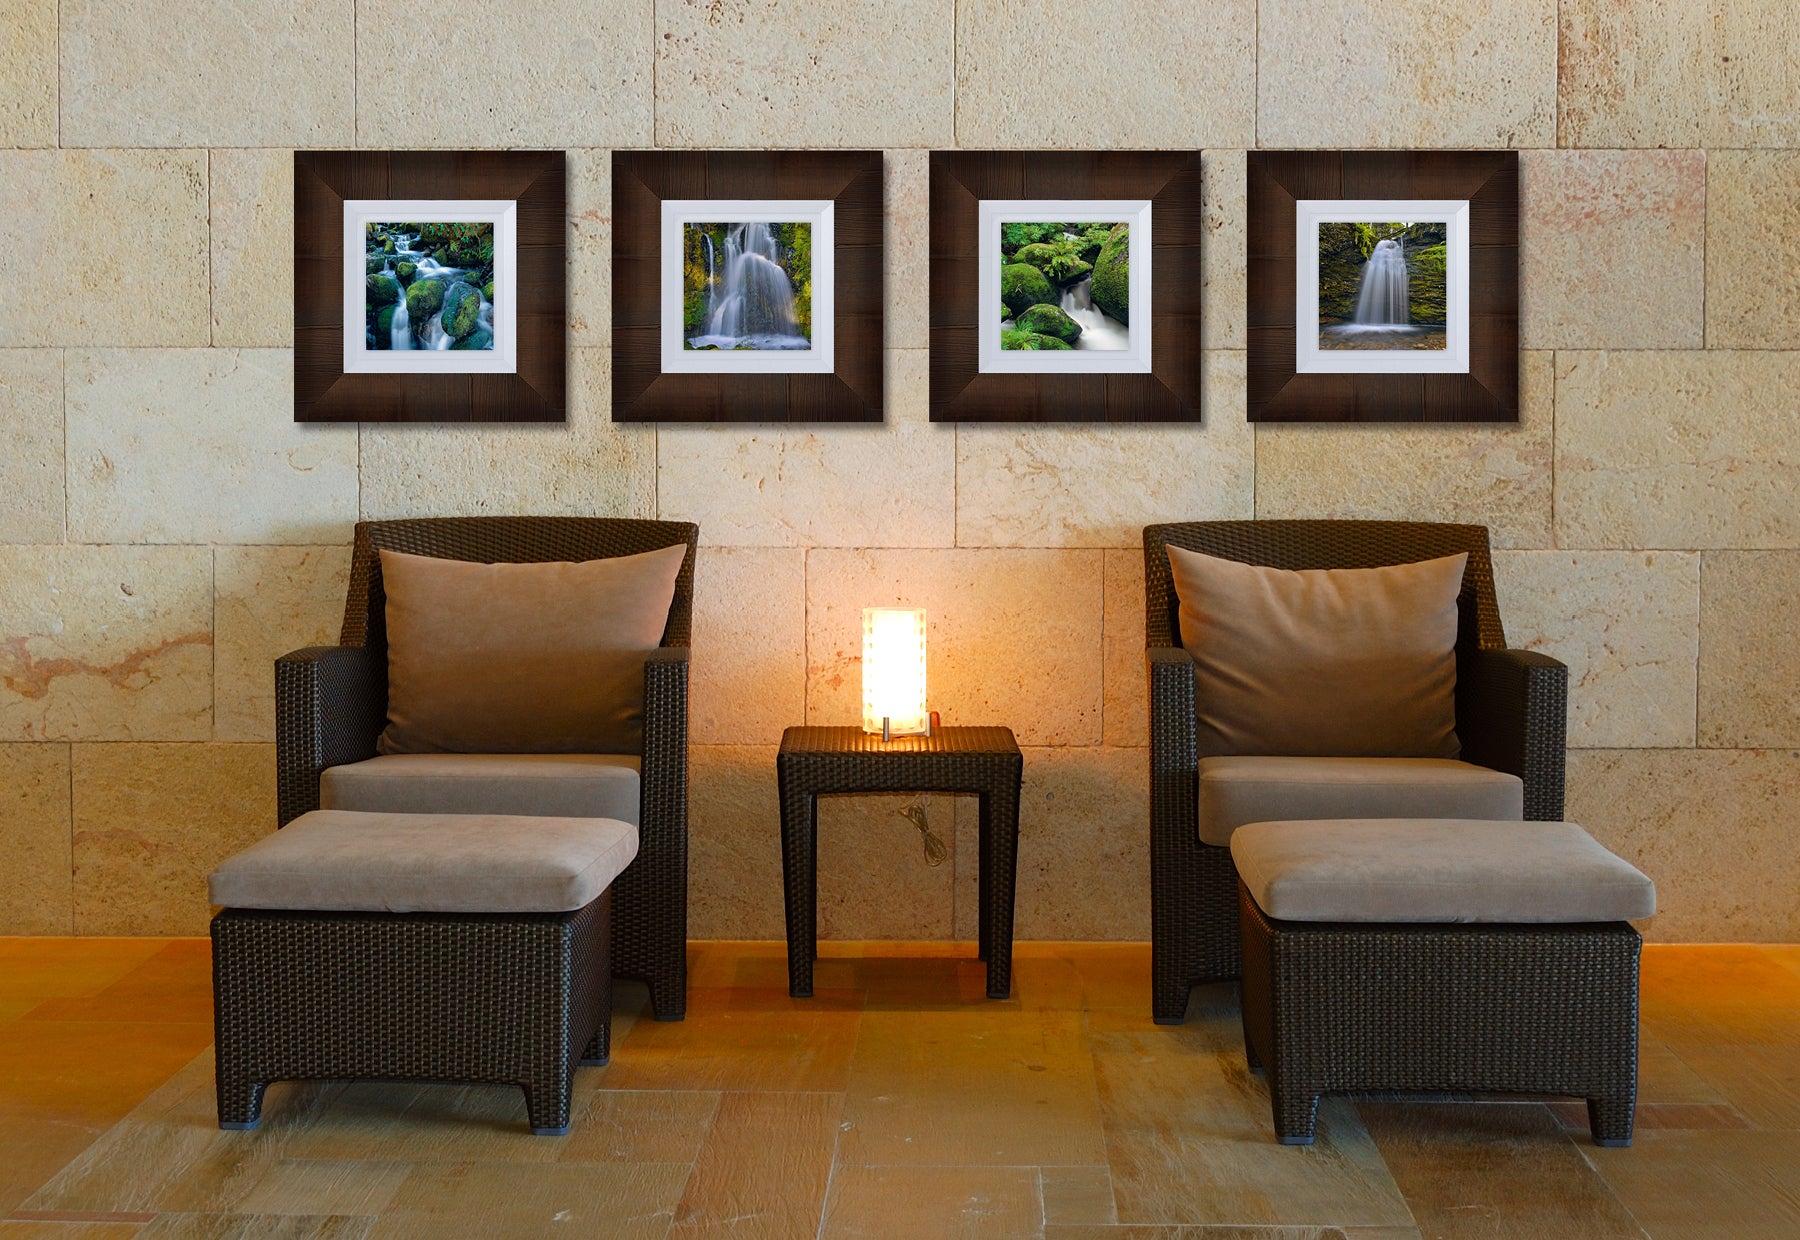 Spa waiting area with two chairs with ottomans featuring four square photographs of waterfalls by Peter Lik in brown frames with with liners